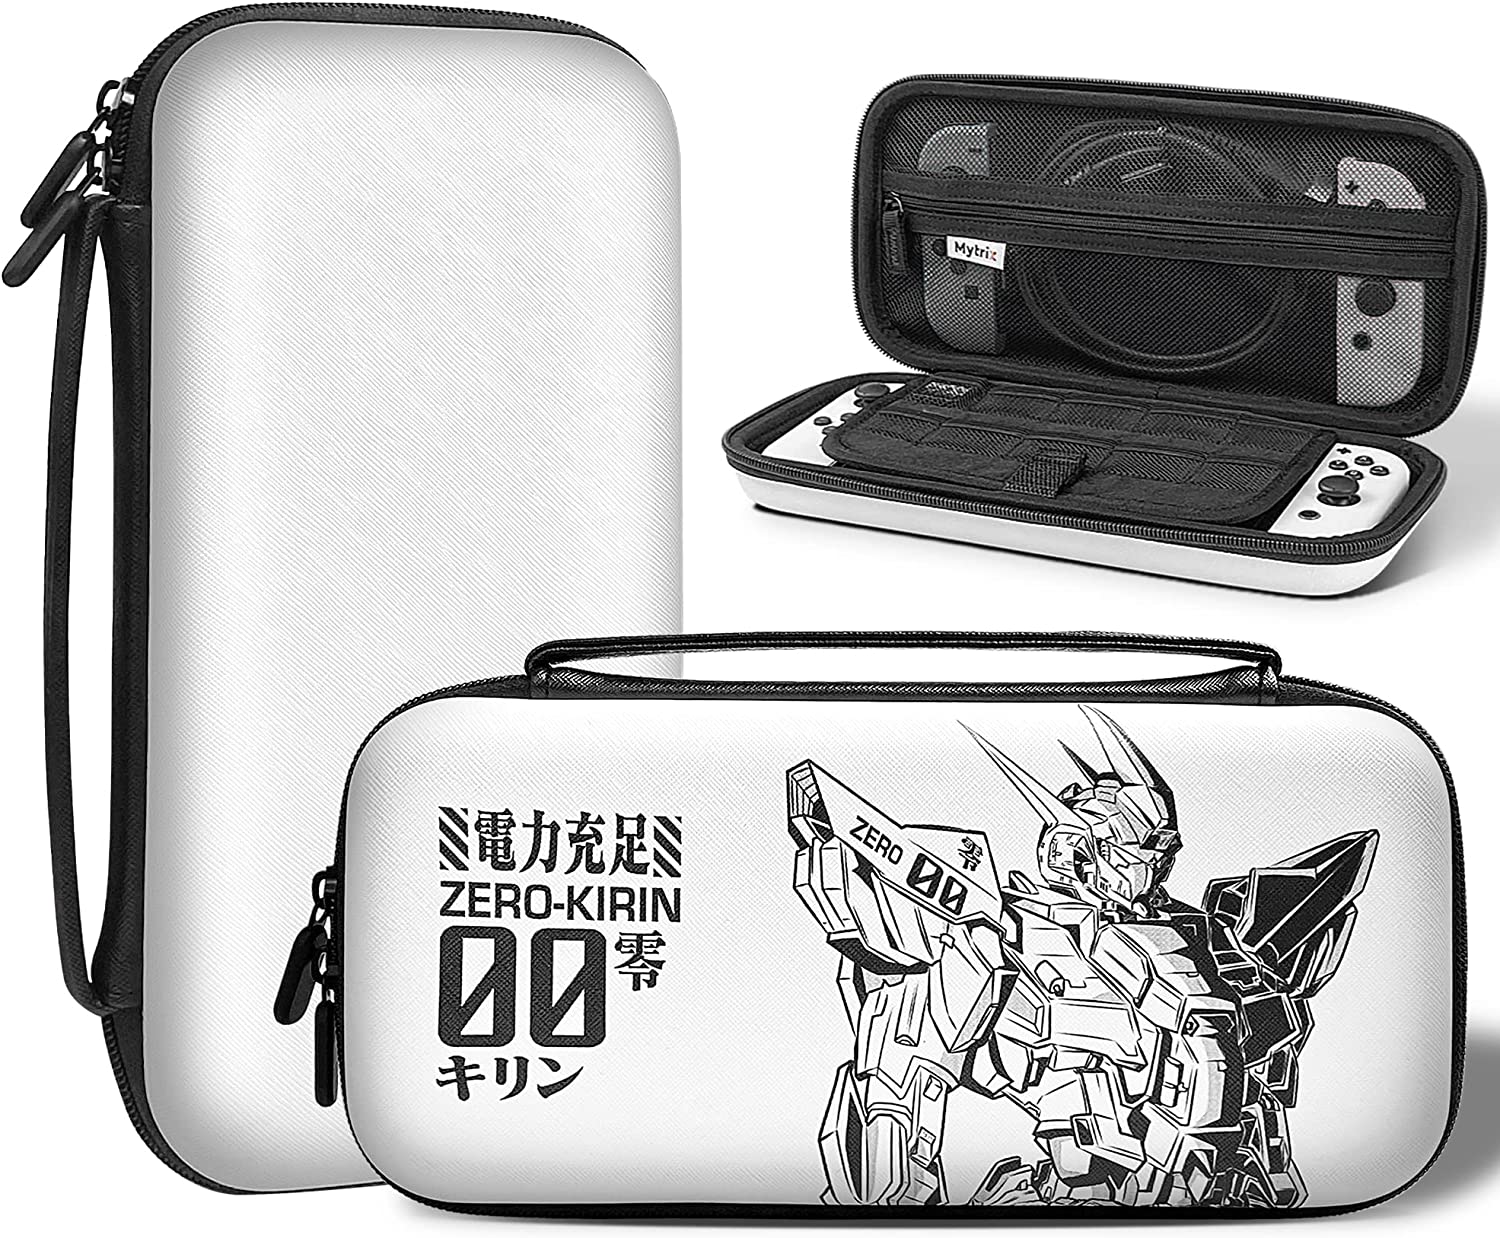 Mytrix Switch Carrying Case for Nintendo Switch & Switch OLED, Zero-Kirin Protective Travel Storage Bag with Pocket & 10 Game Card Slots